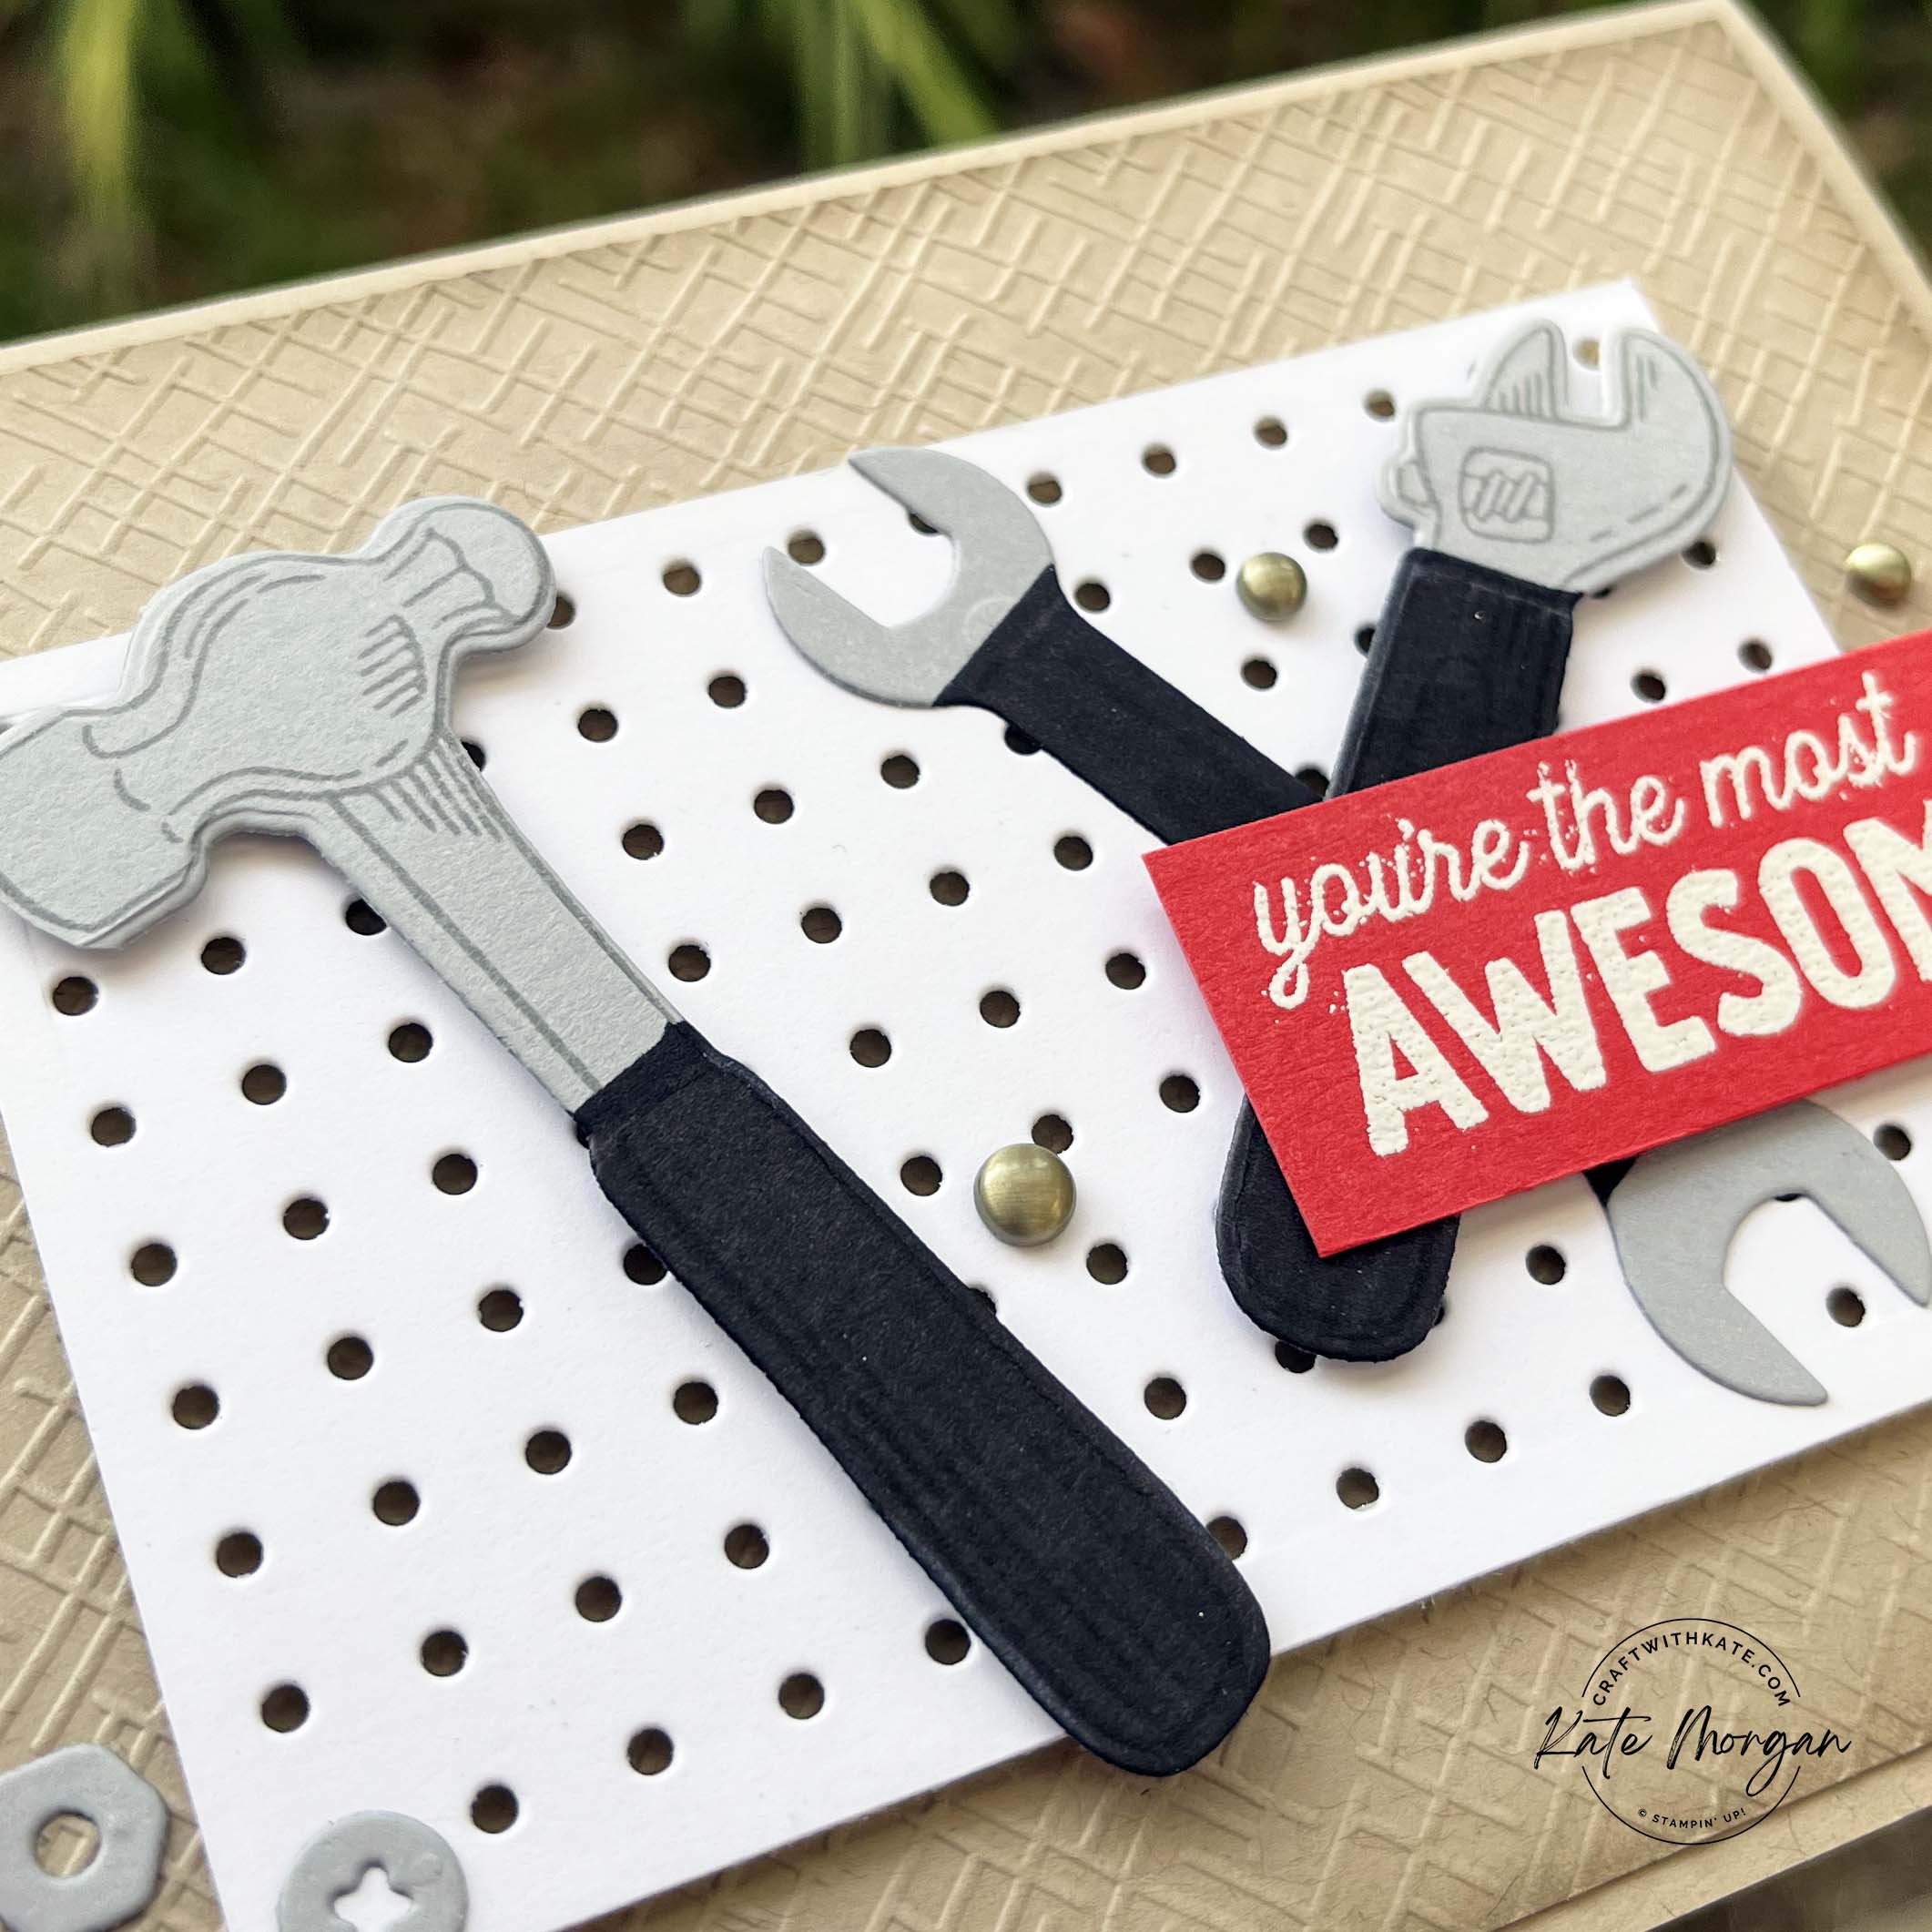 Masculine Trusty Tools card Smoky Slate Colour Creations Blog Hop by Kate Morgan Stampin Up Australia 2024.